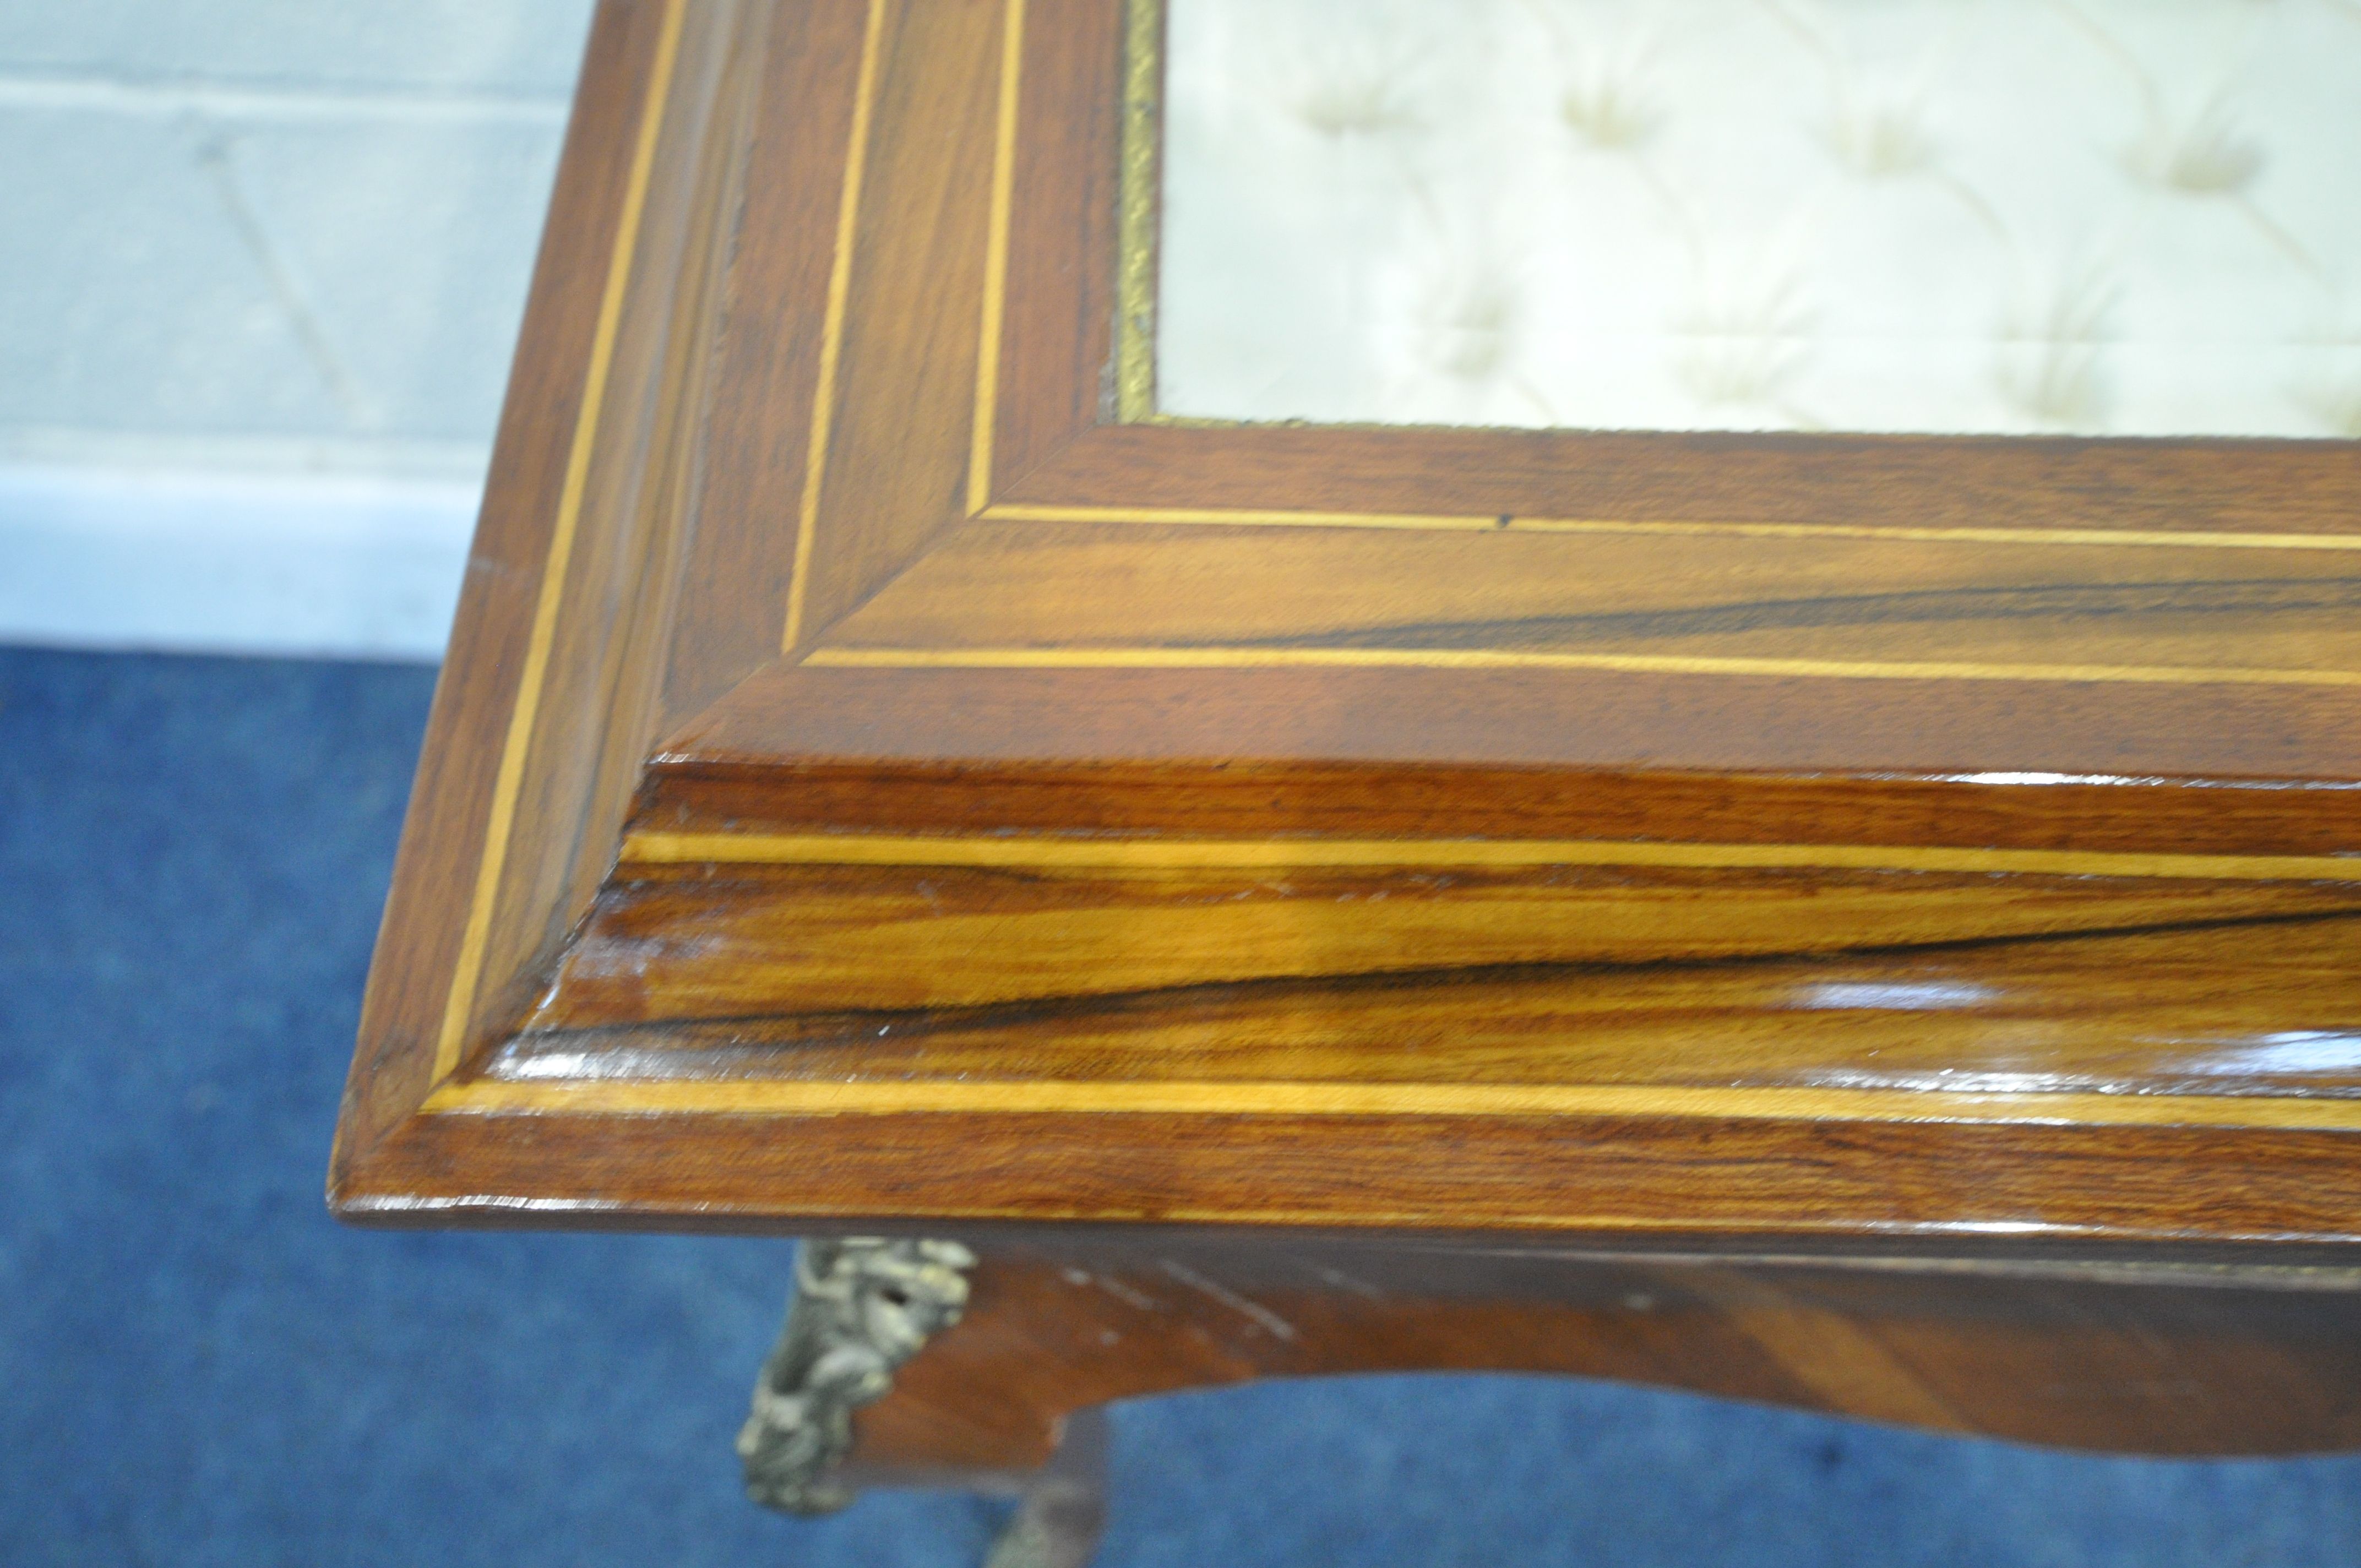 A FRENCH LOUIS XVI STYLE KINGWOOD BIJOUTERIE TABLE, with rosewood inlay and gilt metal mounts - Image 3 of 5